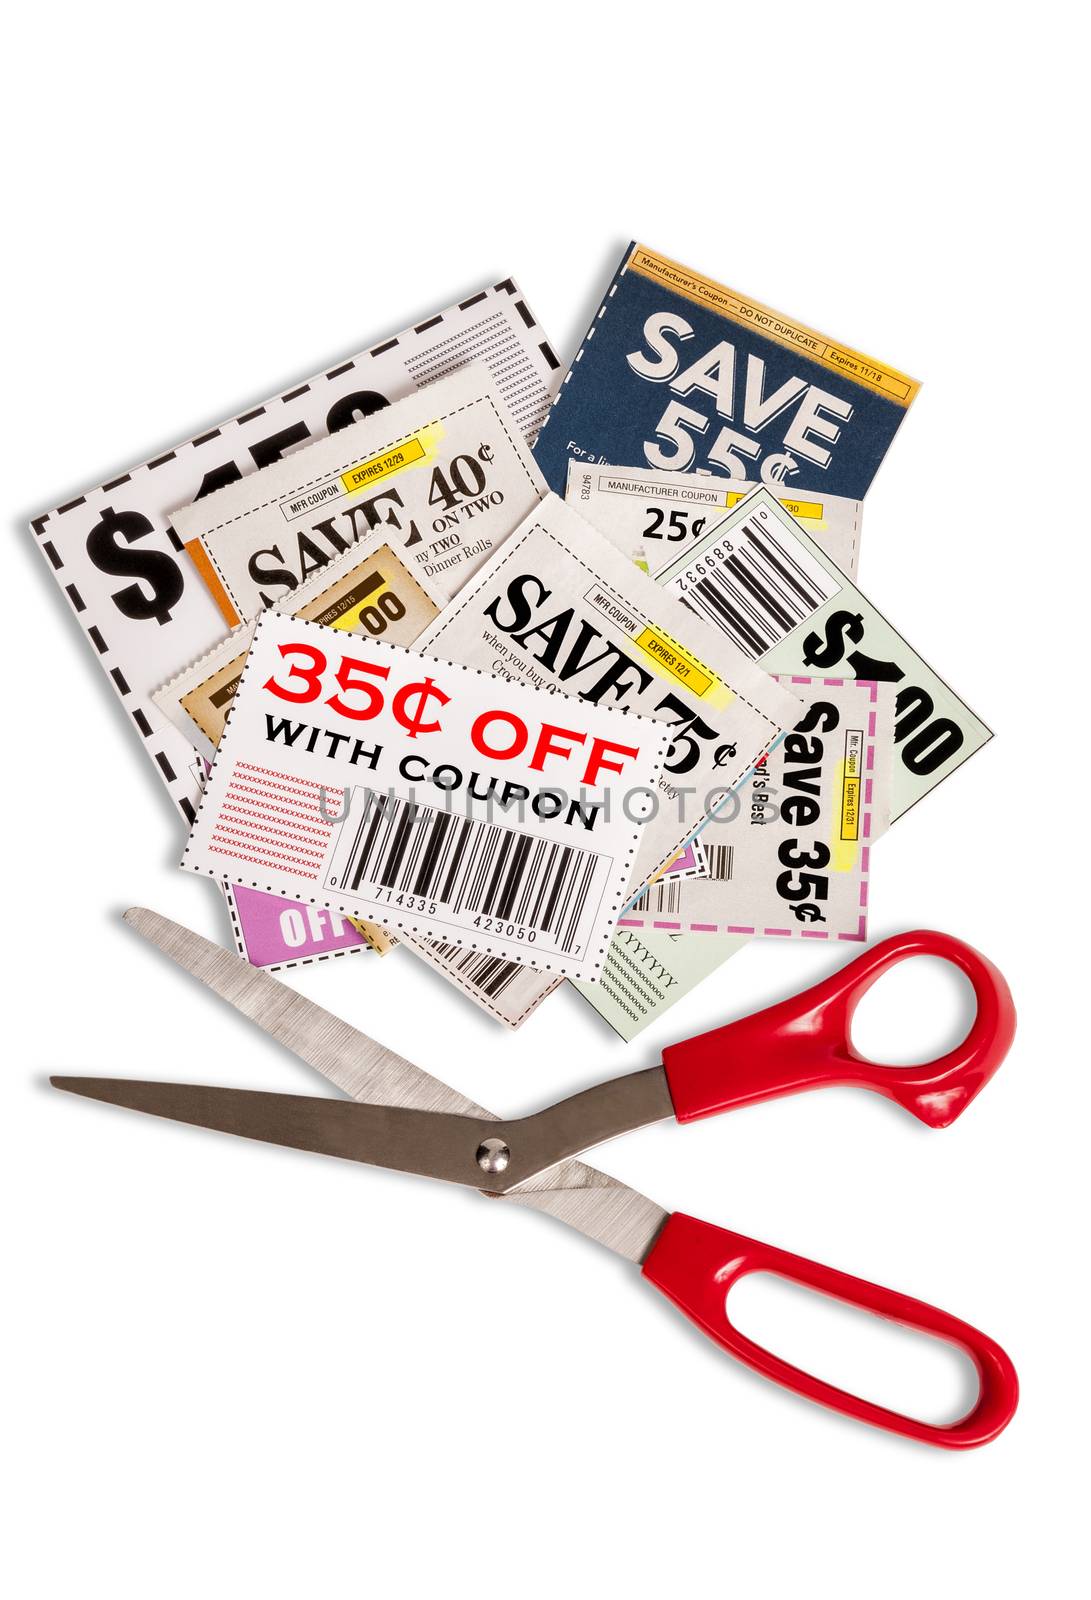 Please note...all coupons showing are not real. They are fictional.  Grocery coupons scattered about with red scissors.  Isolated on white.